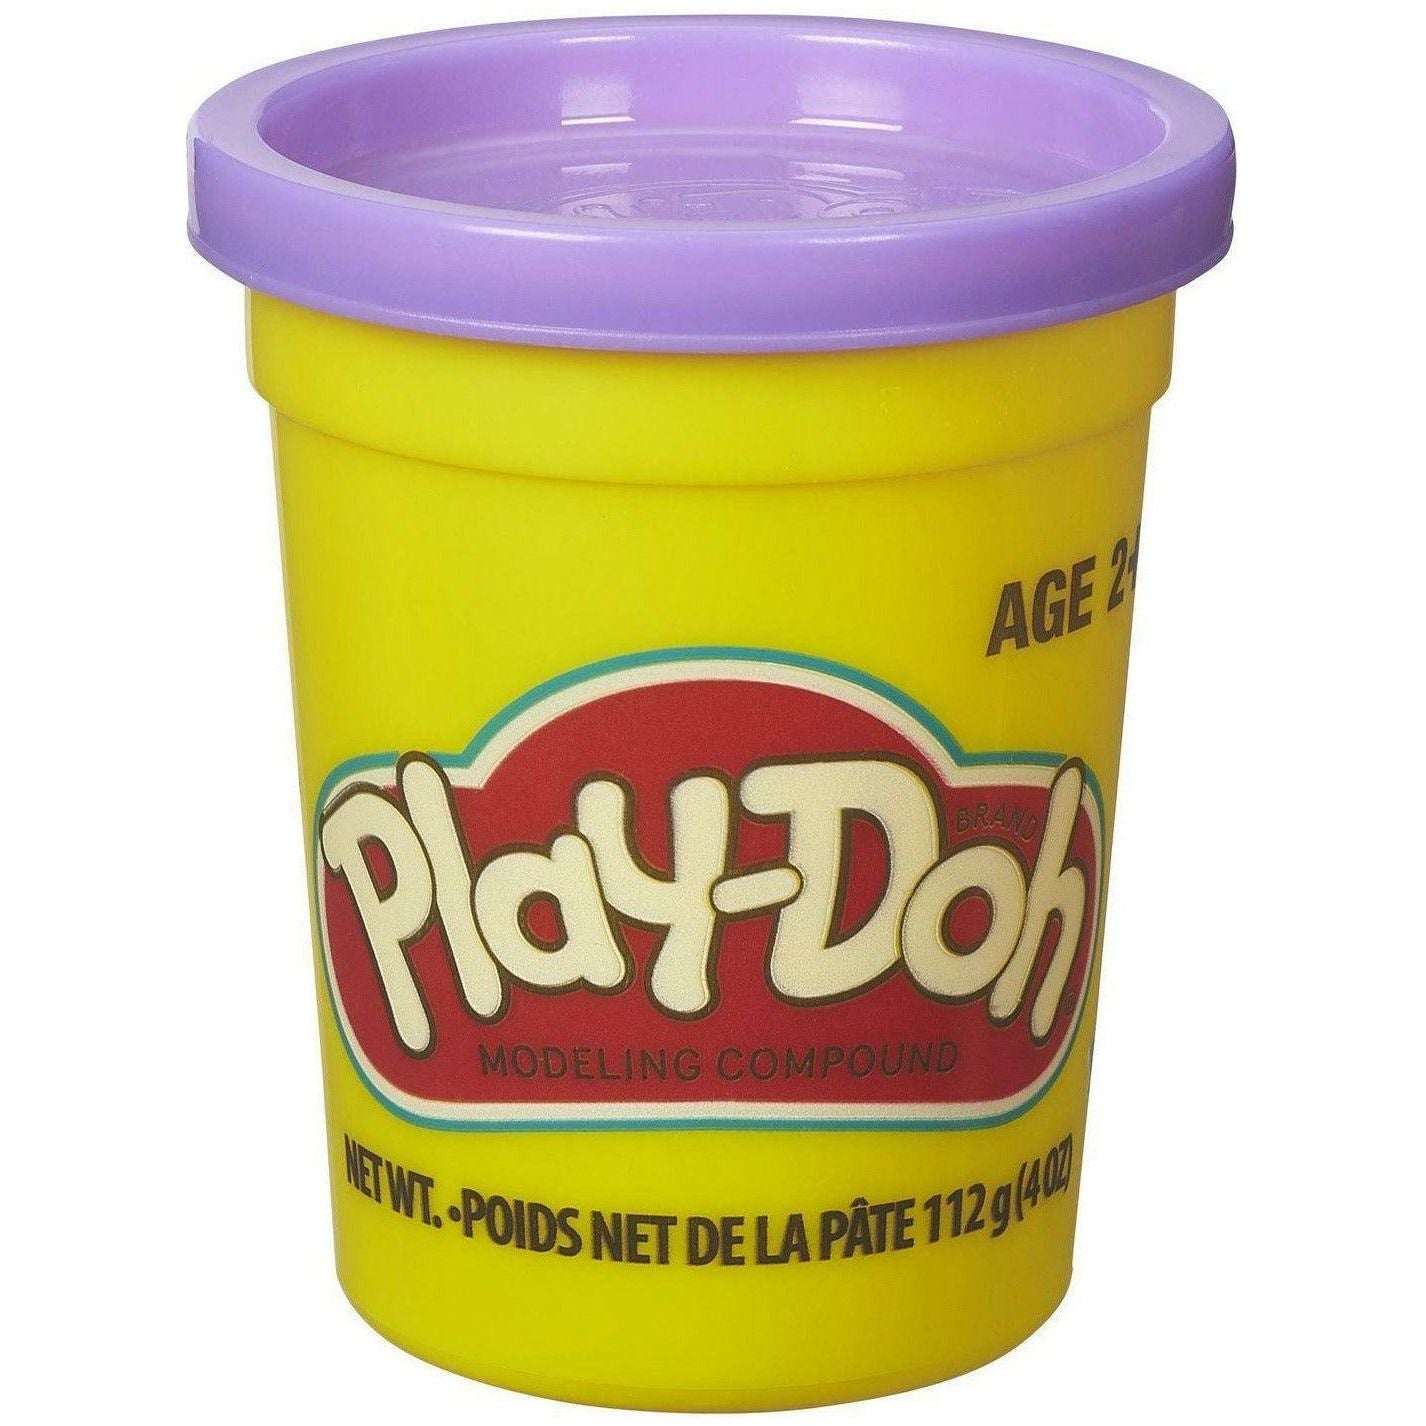 Hasbro Play-Doh Single Can 112g - Purple - BumbleToys - 2-4 Years, 5-7 Years, Boys, Eagle Plus, Girls, Learning Toys, Make & Create